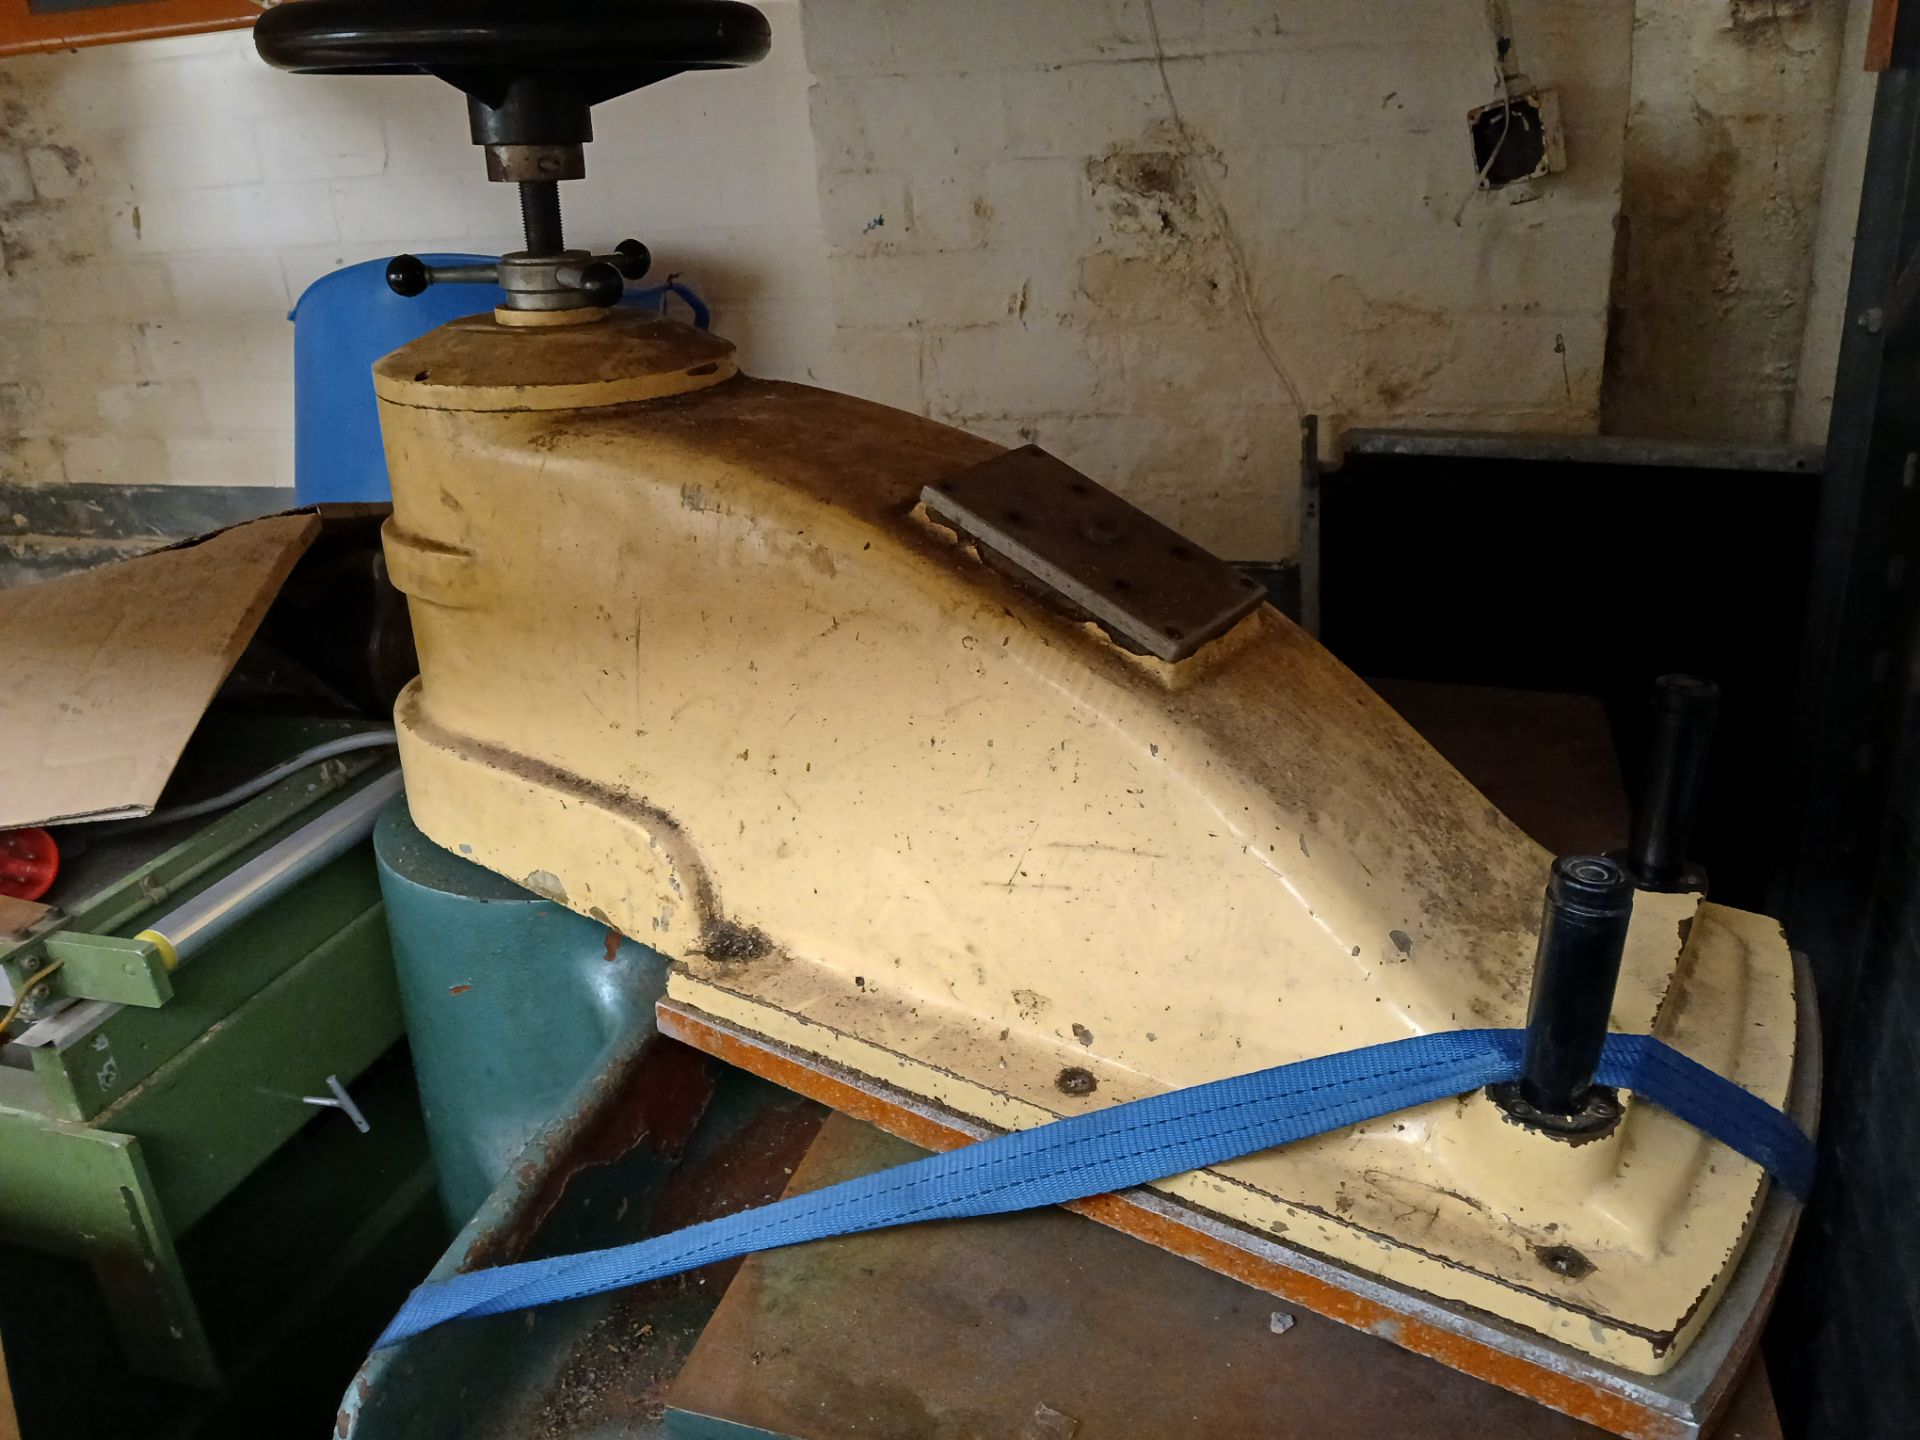 Atom G222 rotating head plate press – spares or repairs, overall dimensions 92cm(w) x 90(d) x - Image 2 of 4